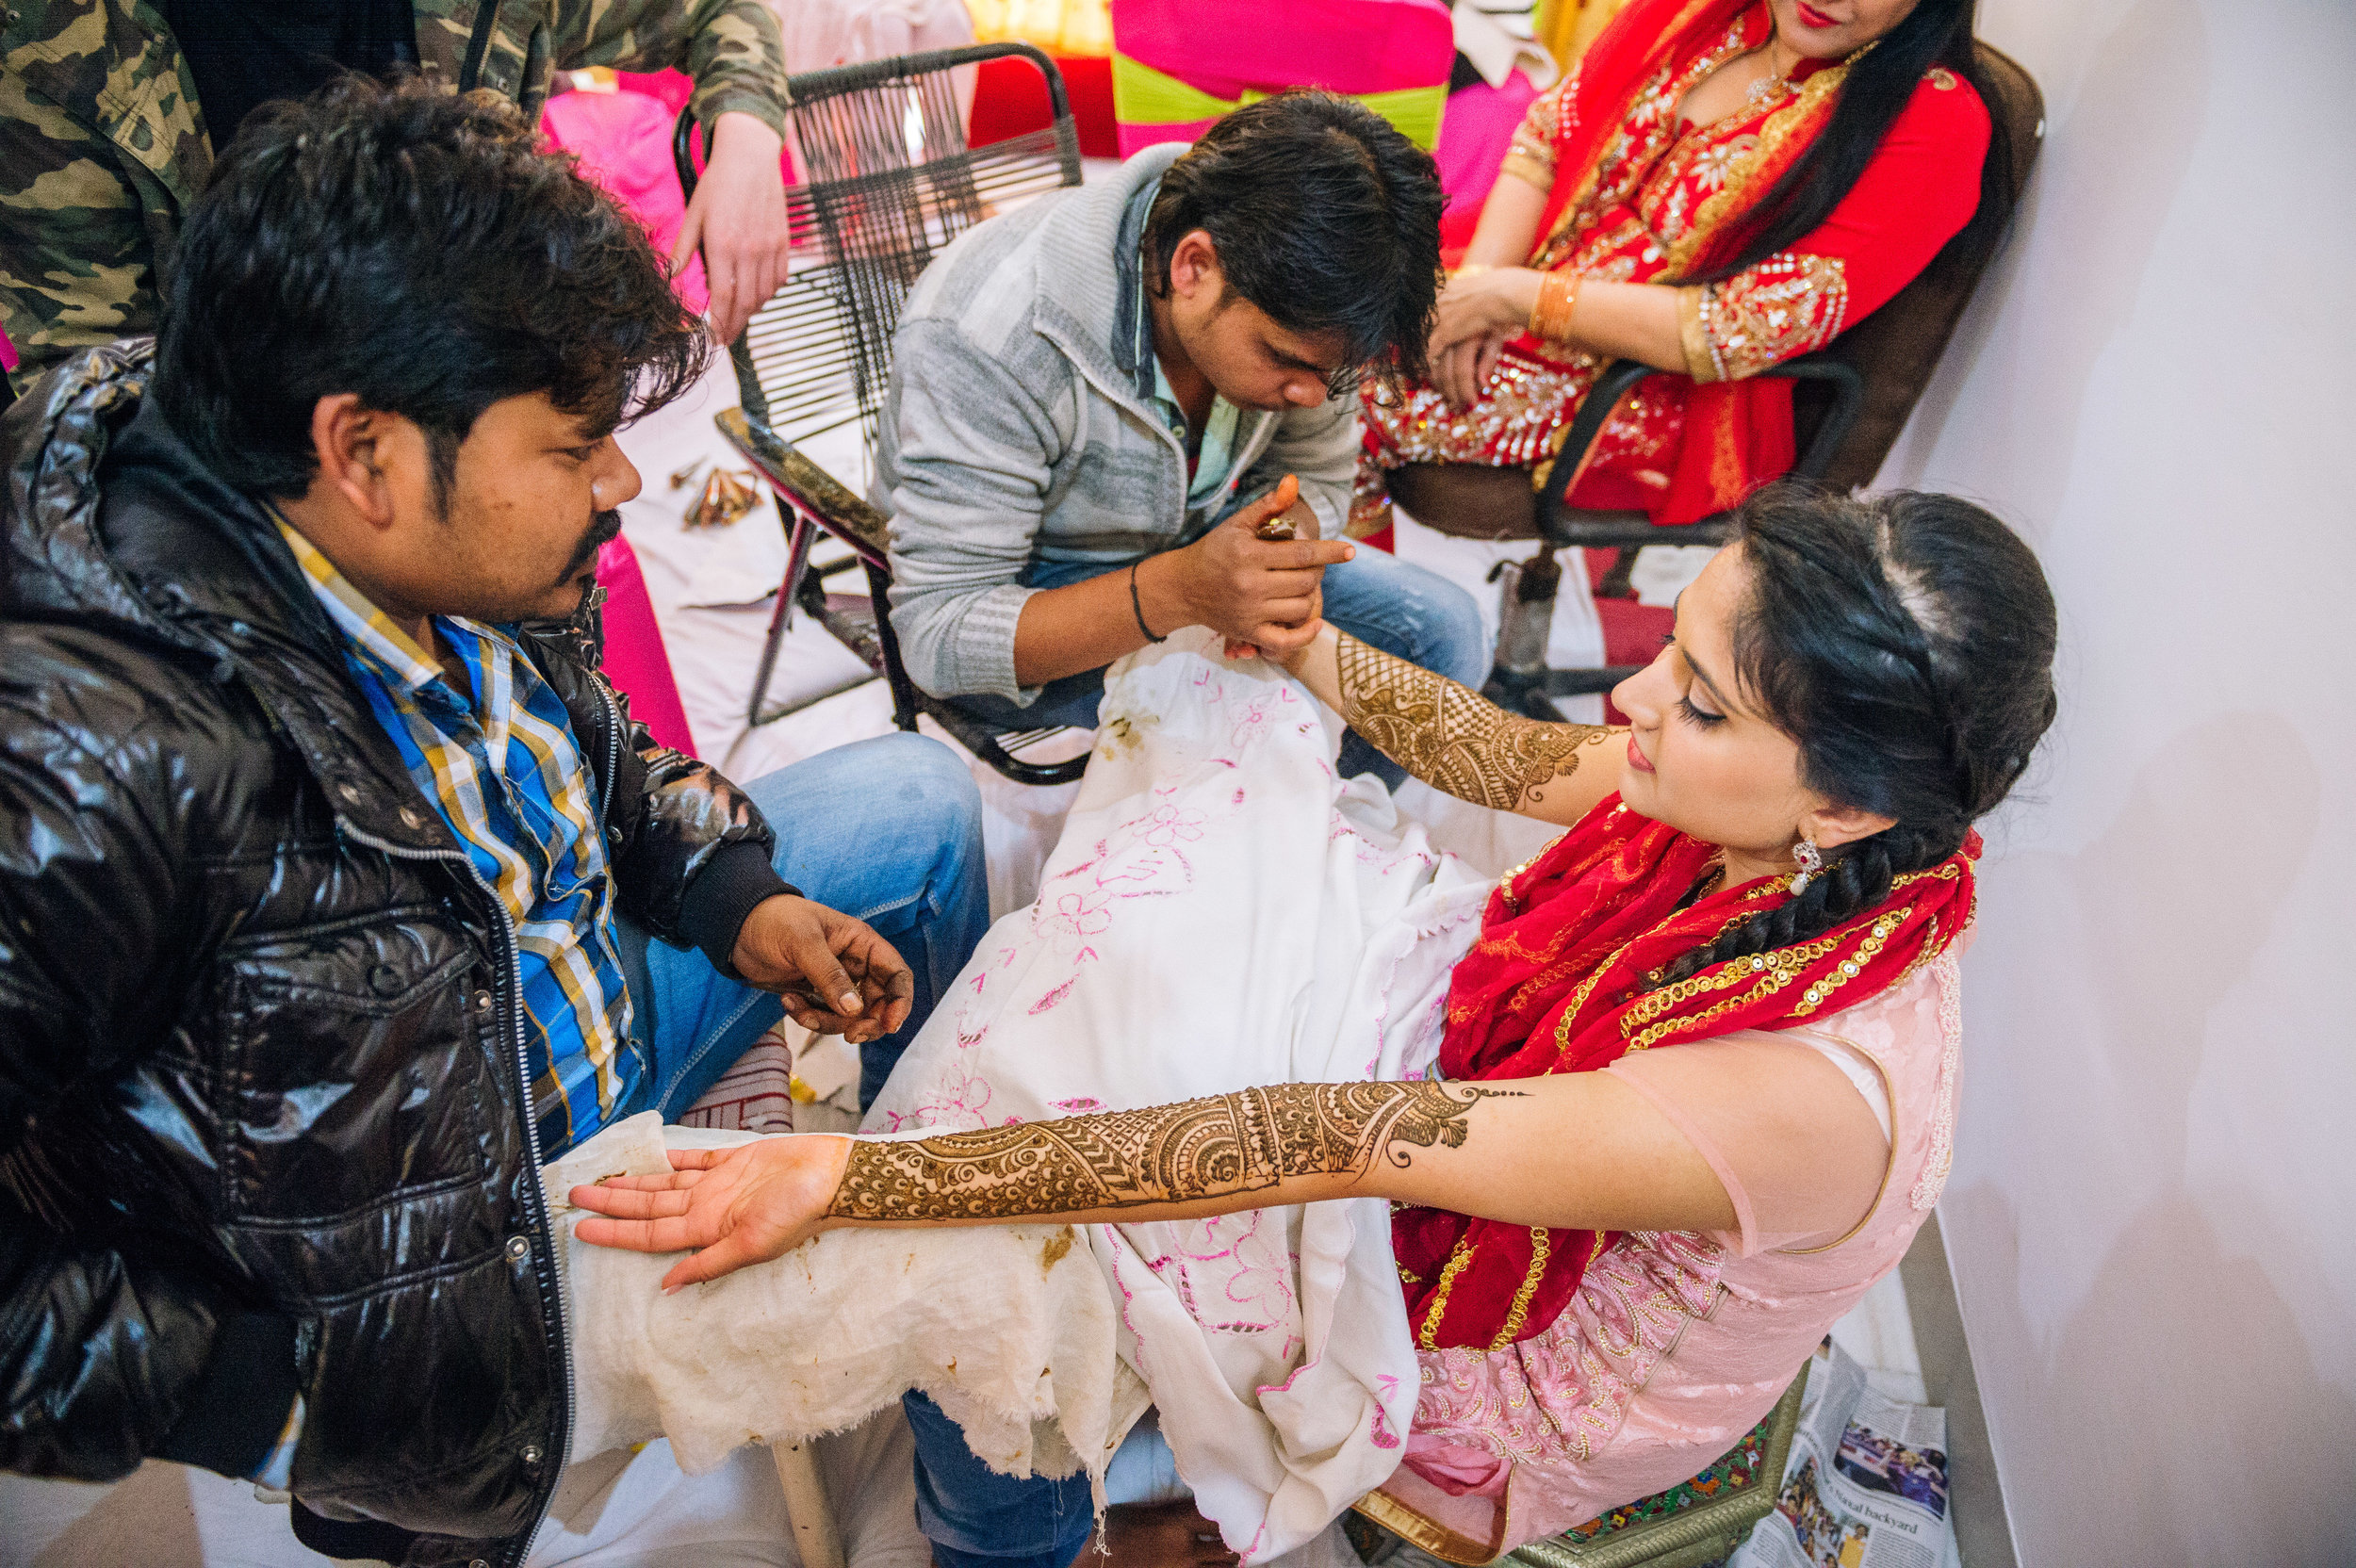  The bride-to-be's mehendi is the most intricate and most time consuming to execute hence the need for 2 professional mehendi artist for this bride-to-be. 